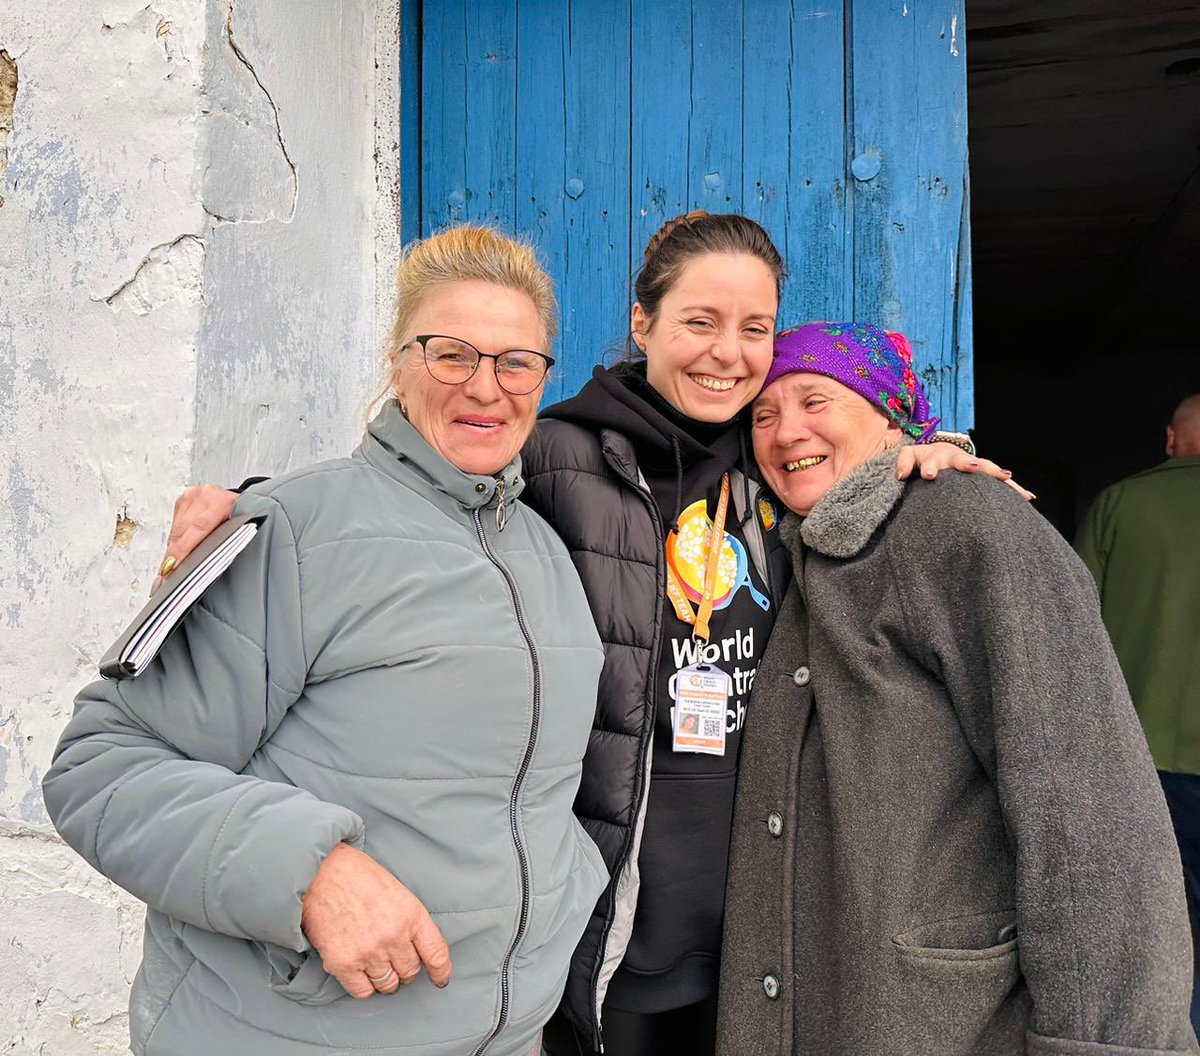 Every day I’m inspired by women of @WCKitchen, brave & caring women in Ukraine, Türkiye, Syria.. all over the world feeding their communities. The work of World Central Kitchen would never be possible without these heroes, I am honored to work with you🙏💙 #InternationalWomensDay